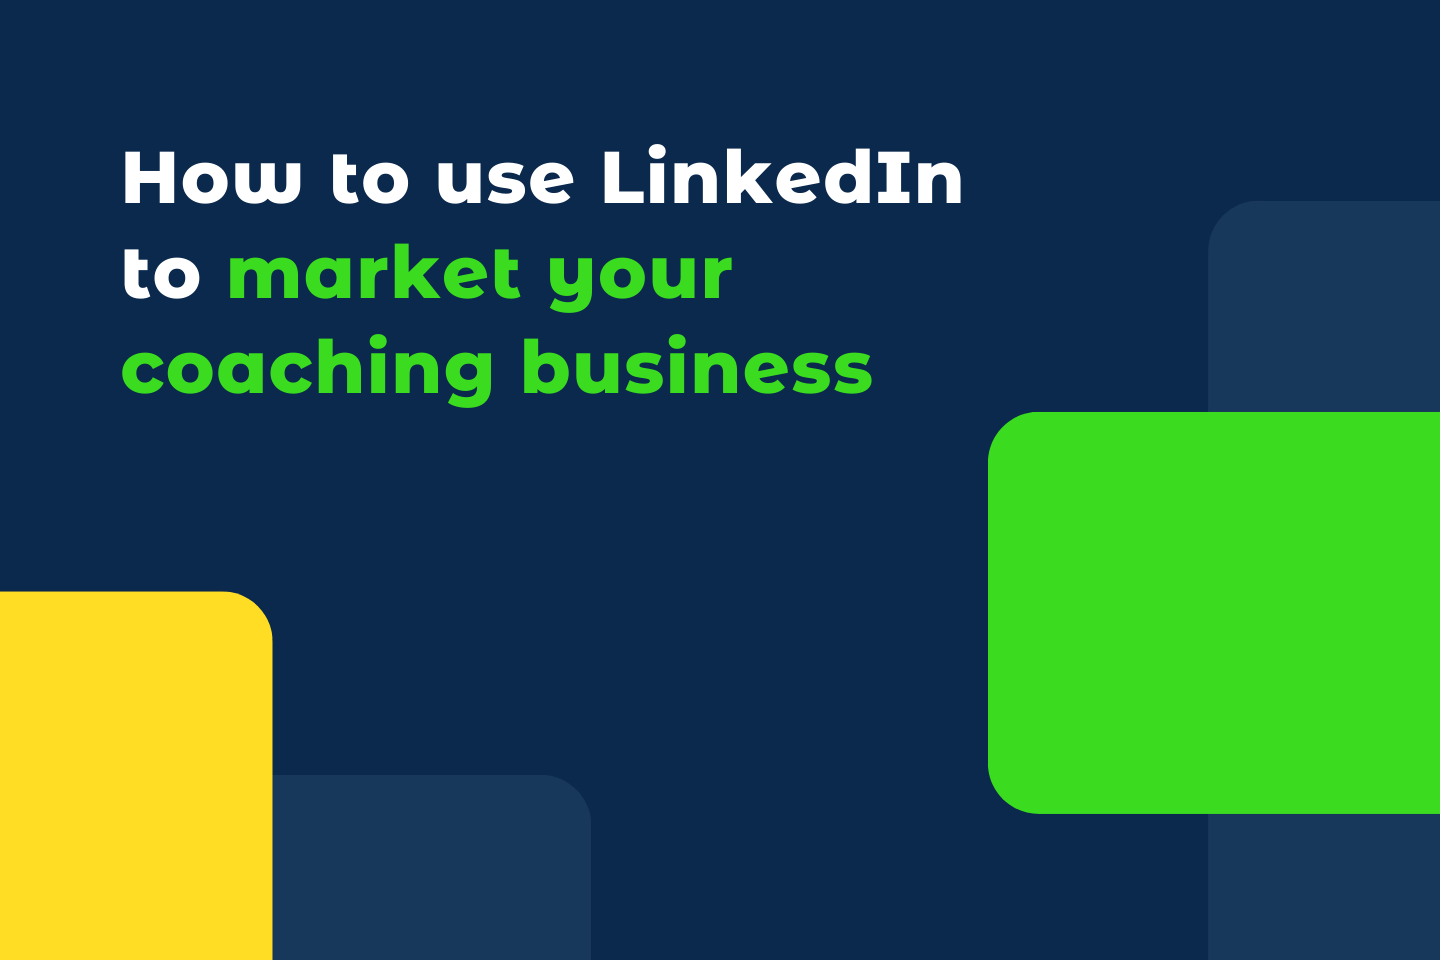 How to use LinkedIn to market your coaching business